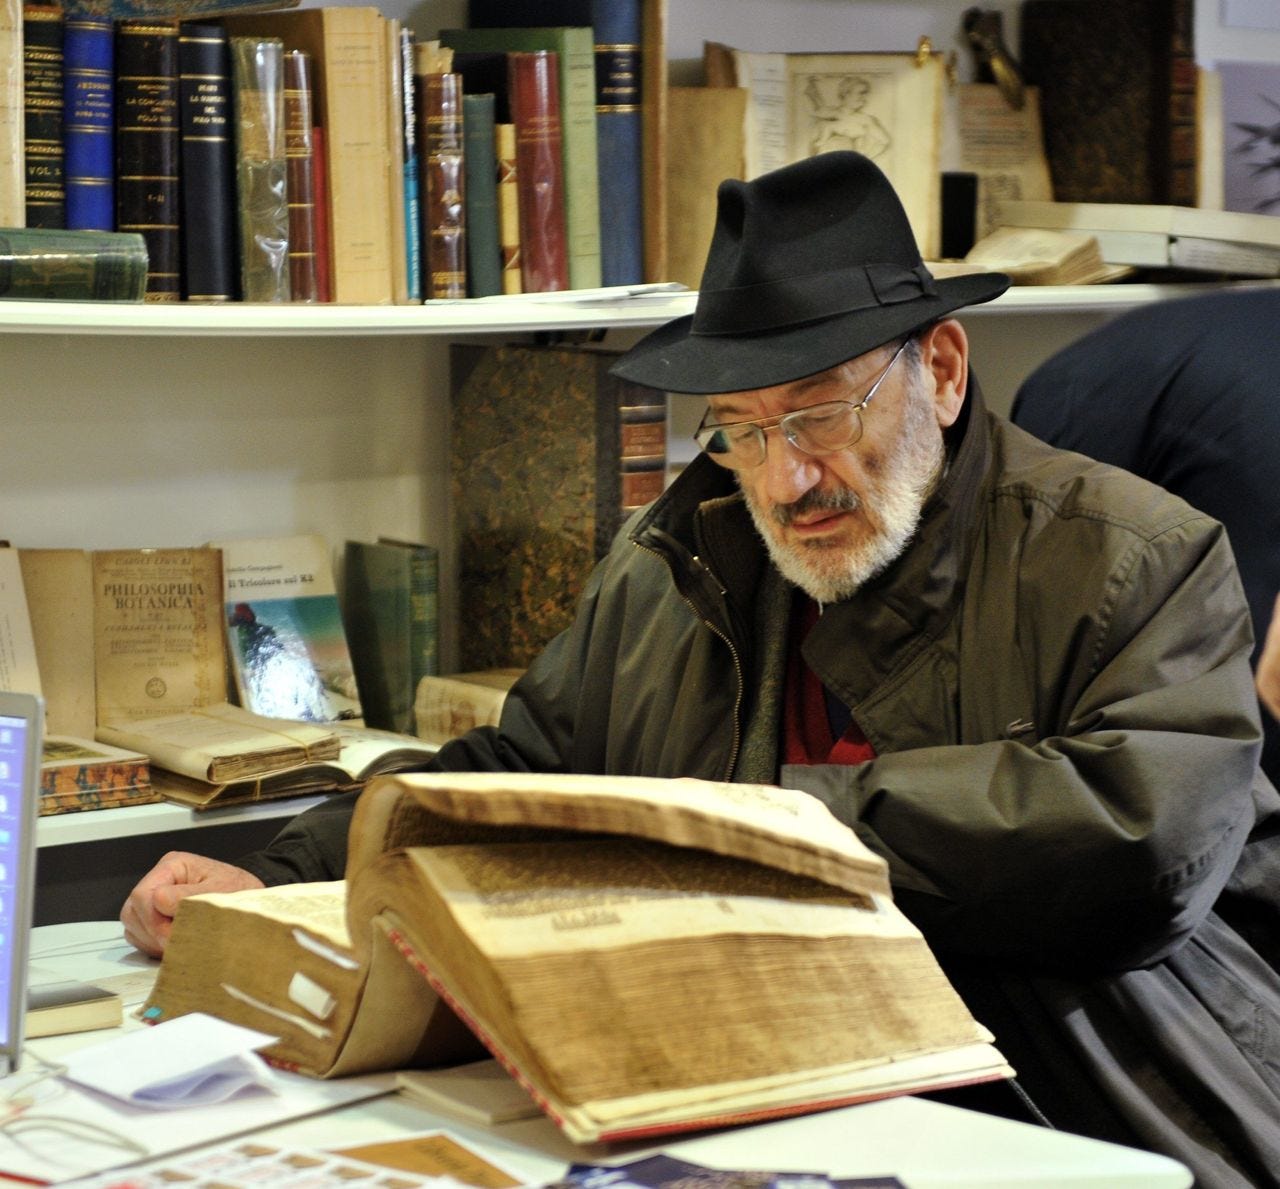 Umberto Eco on Unread Books in a Personal Library, by Süleyman Koç